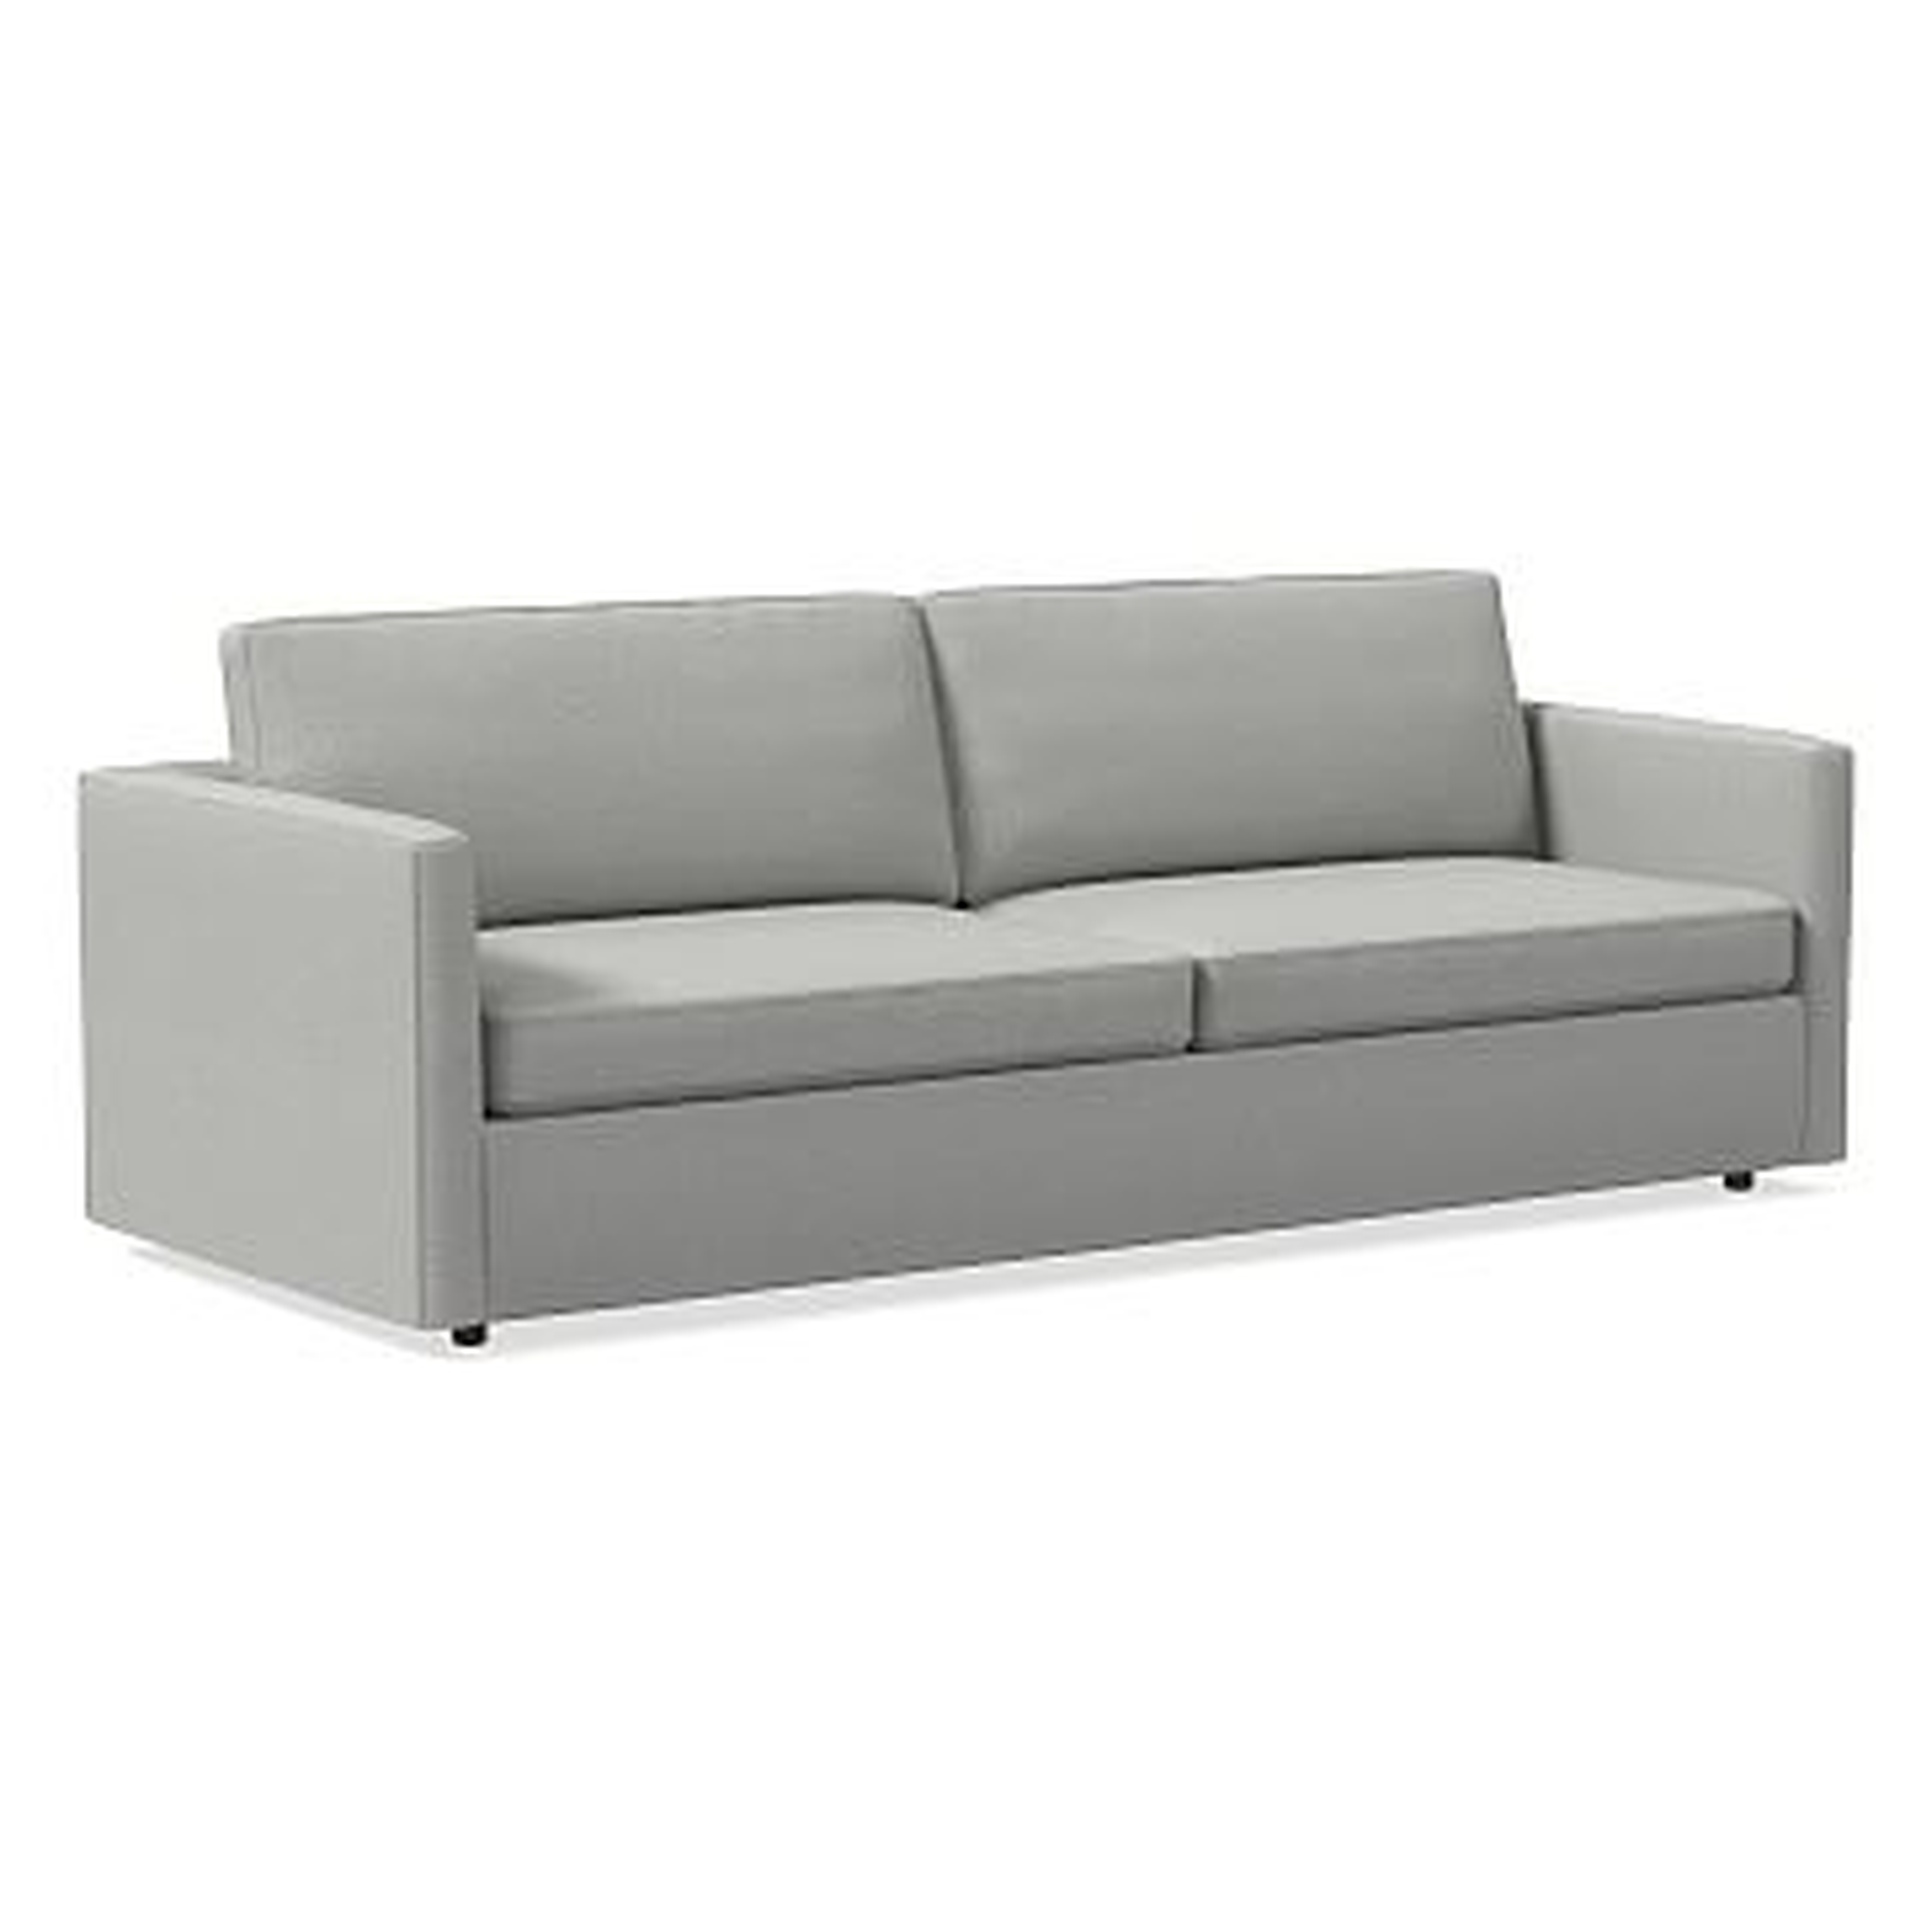 Harris 96" Sofa, Poly, Heathered Crosshatch, Feather Gray, Concealed Supports - West Elm